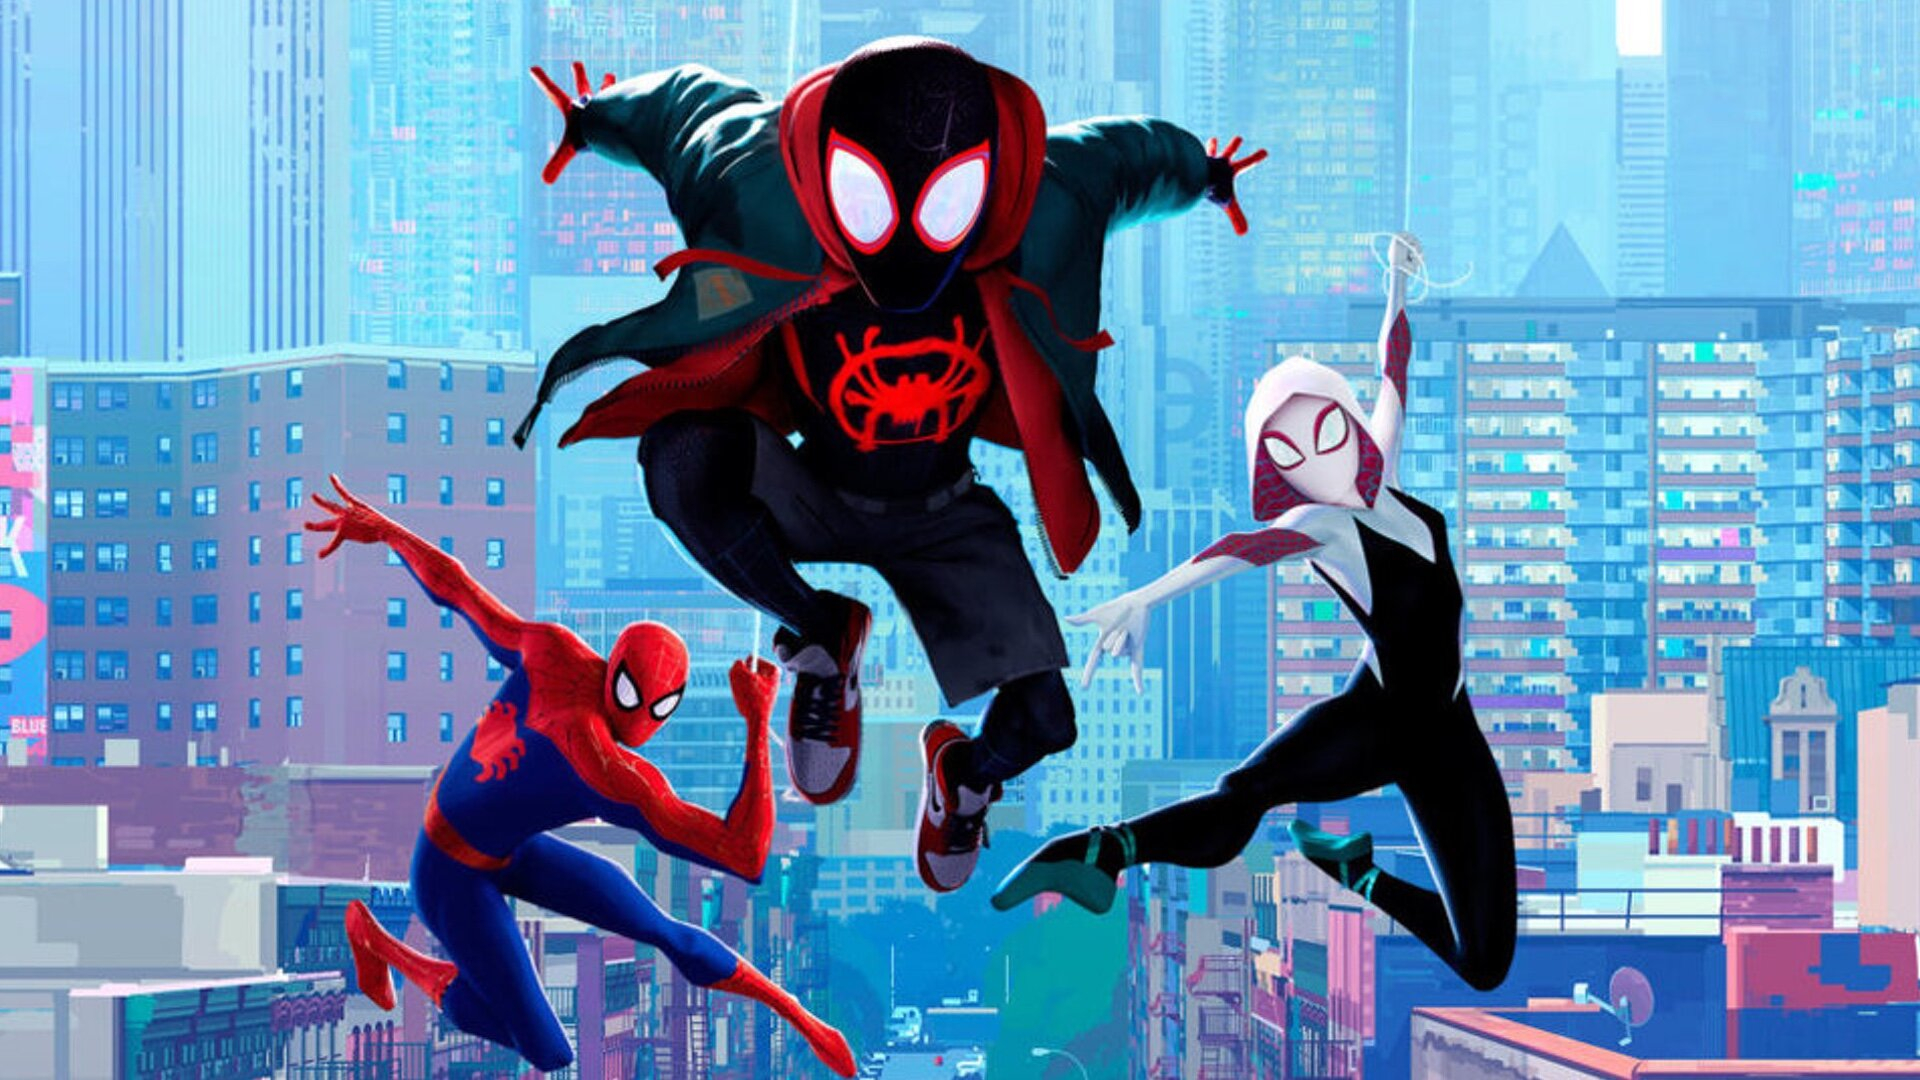 Another Spider-Man Variant Has Been Revealed In Across The Spider-Verse